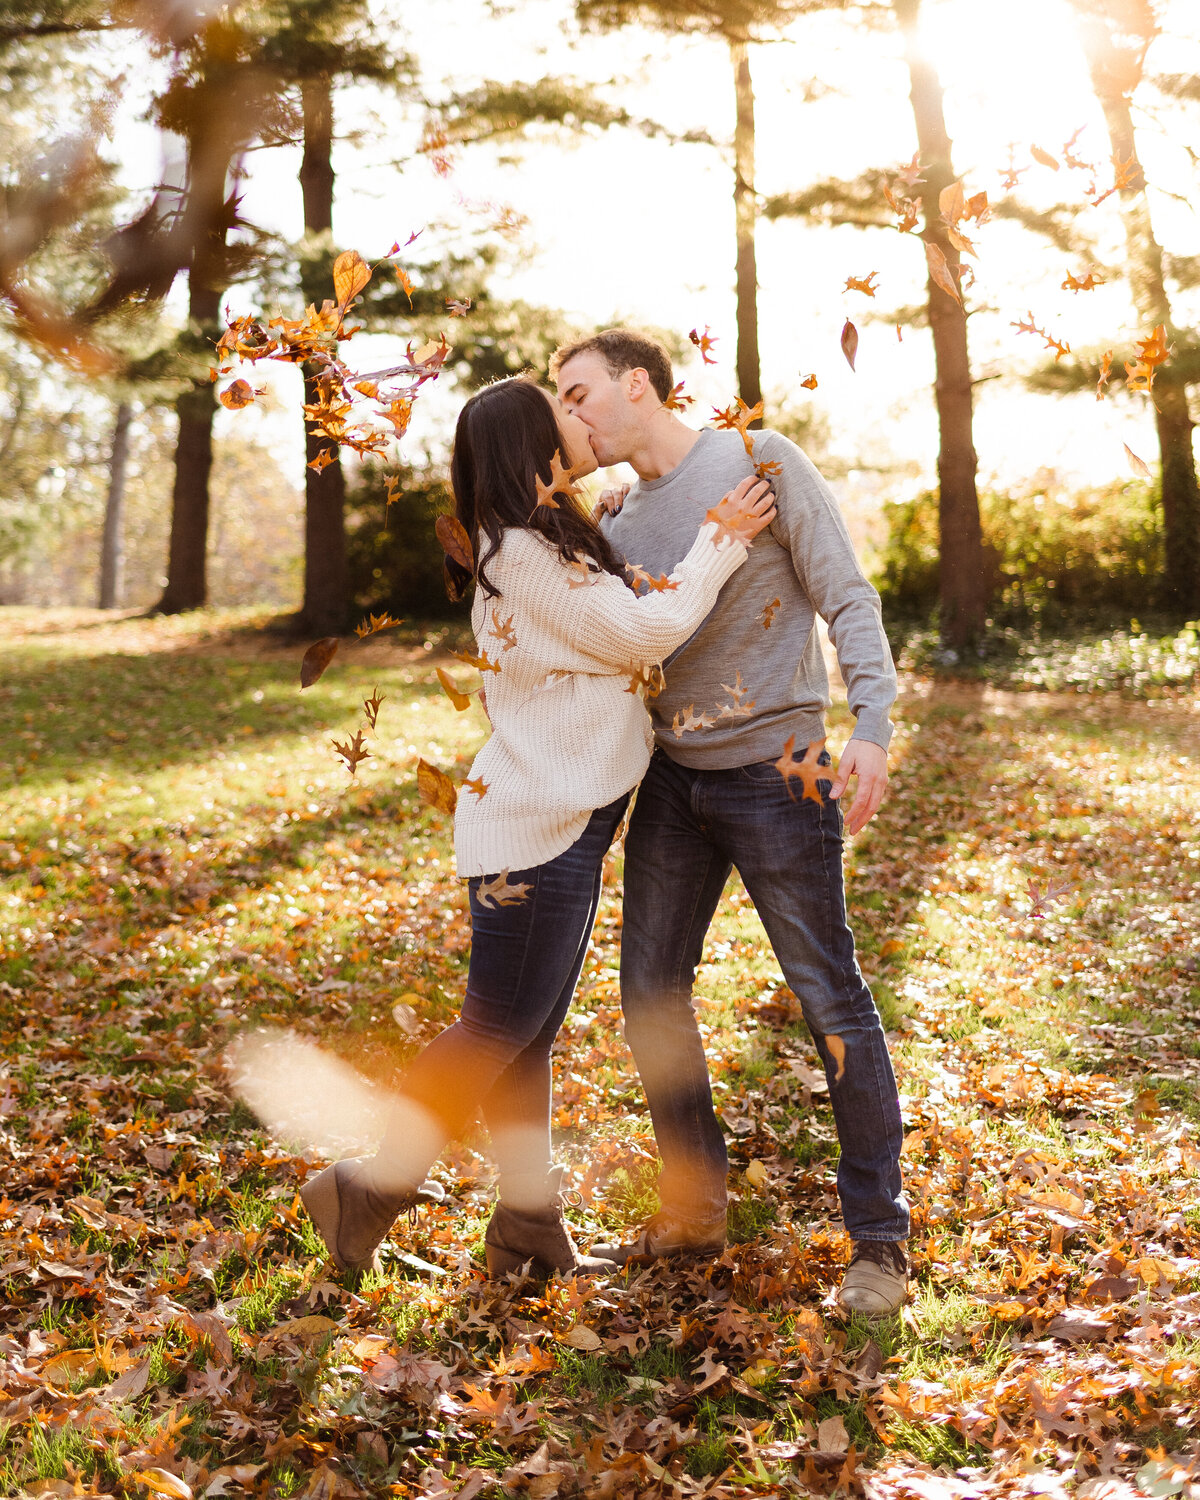 fall-engagement-photos-november-central-park-nyc-by-suess-moments-weddings (4 of 4)